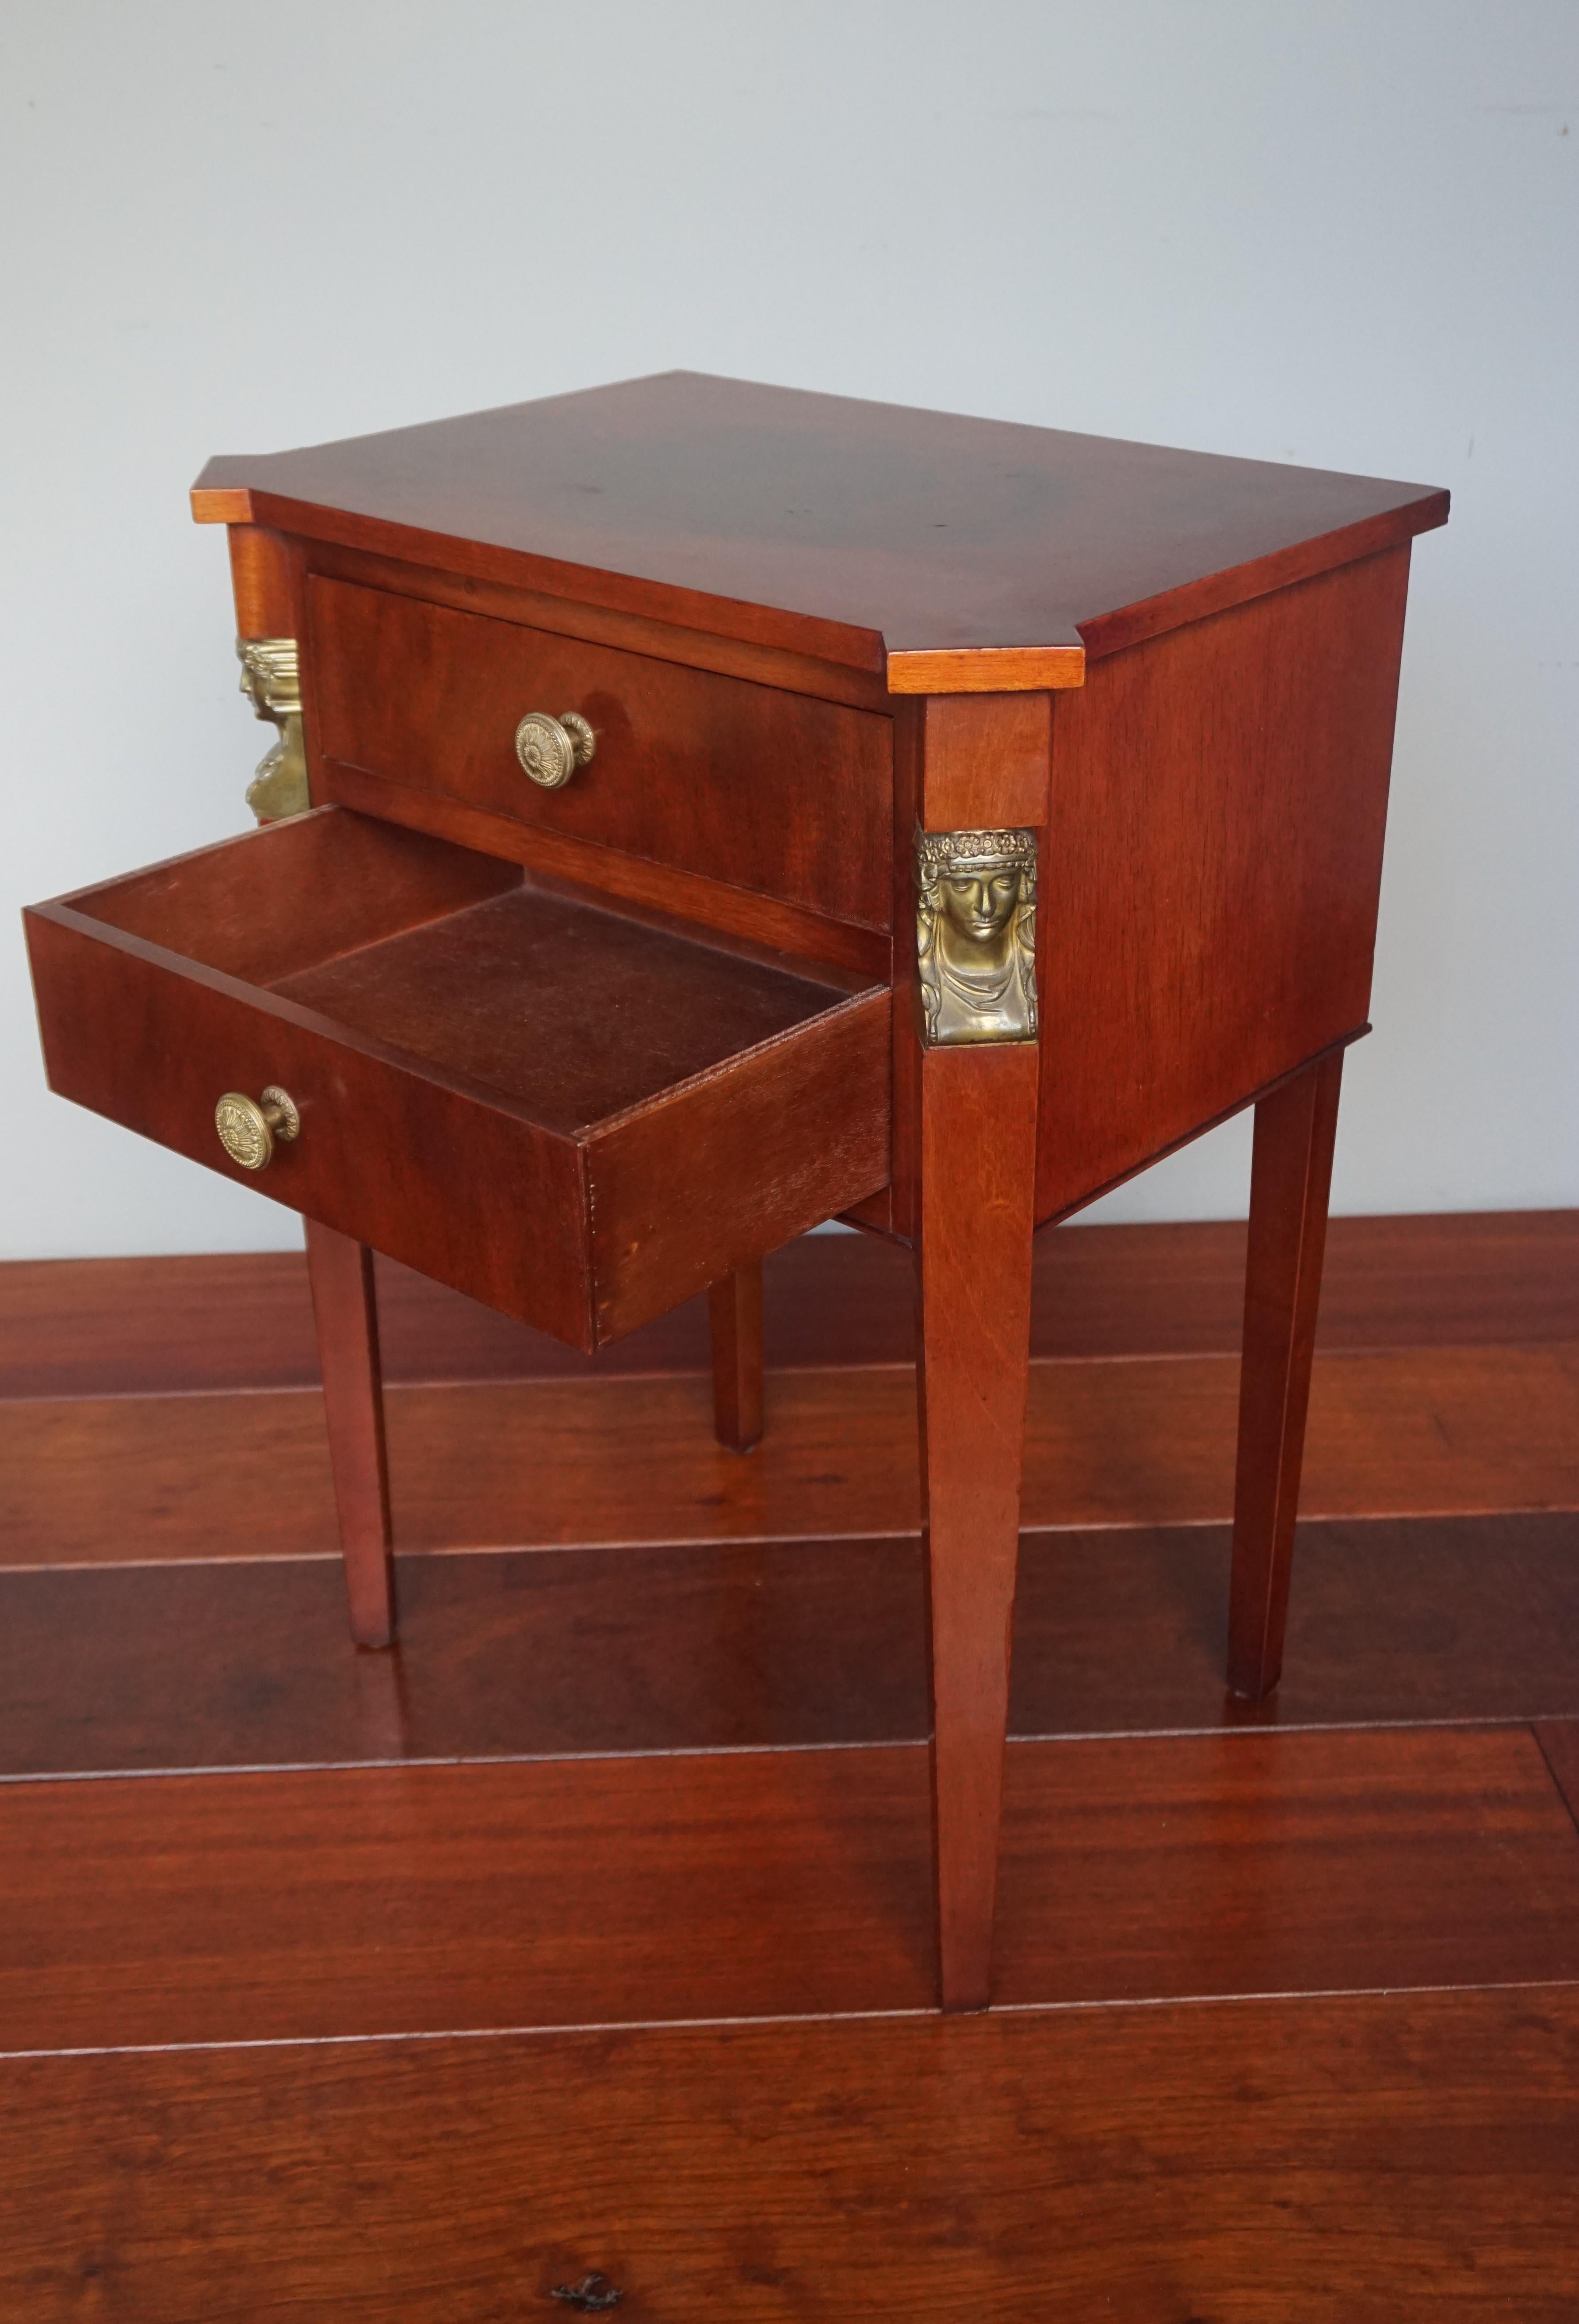 Cast Small Size Empire Revival Patinated End or Side Table w. Drawers & Goddess Masks For Sale